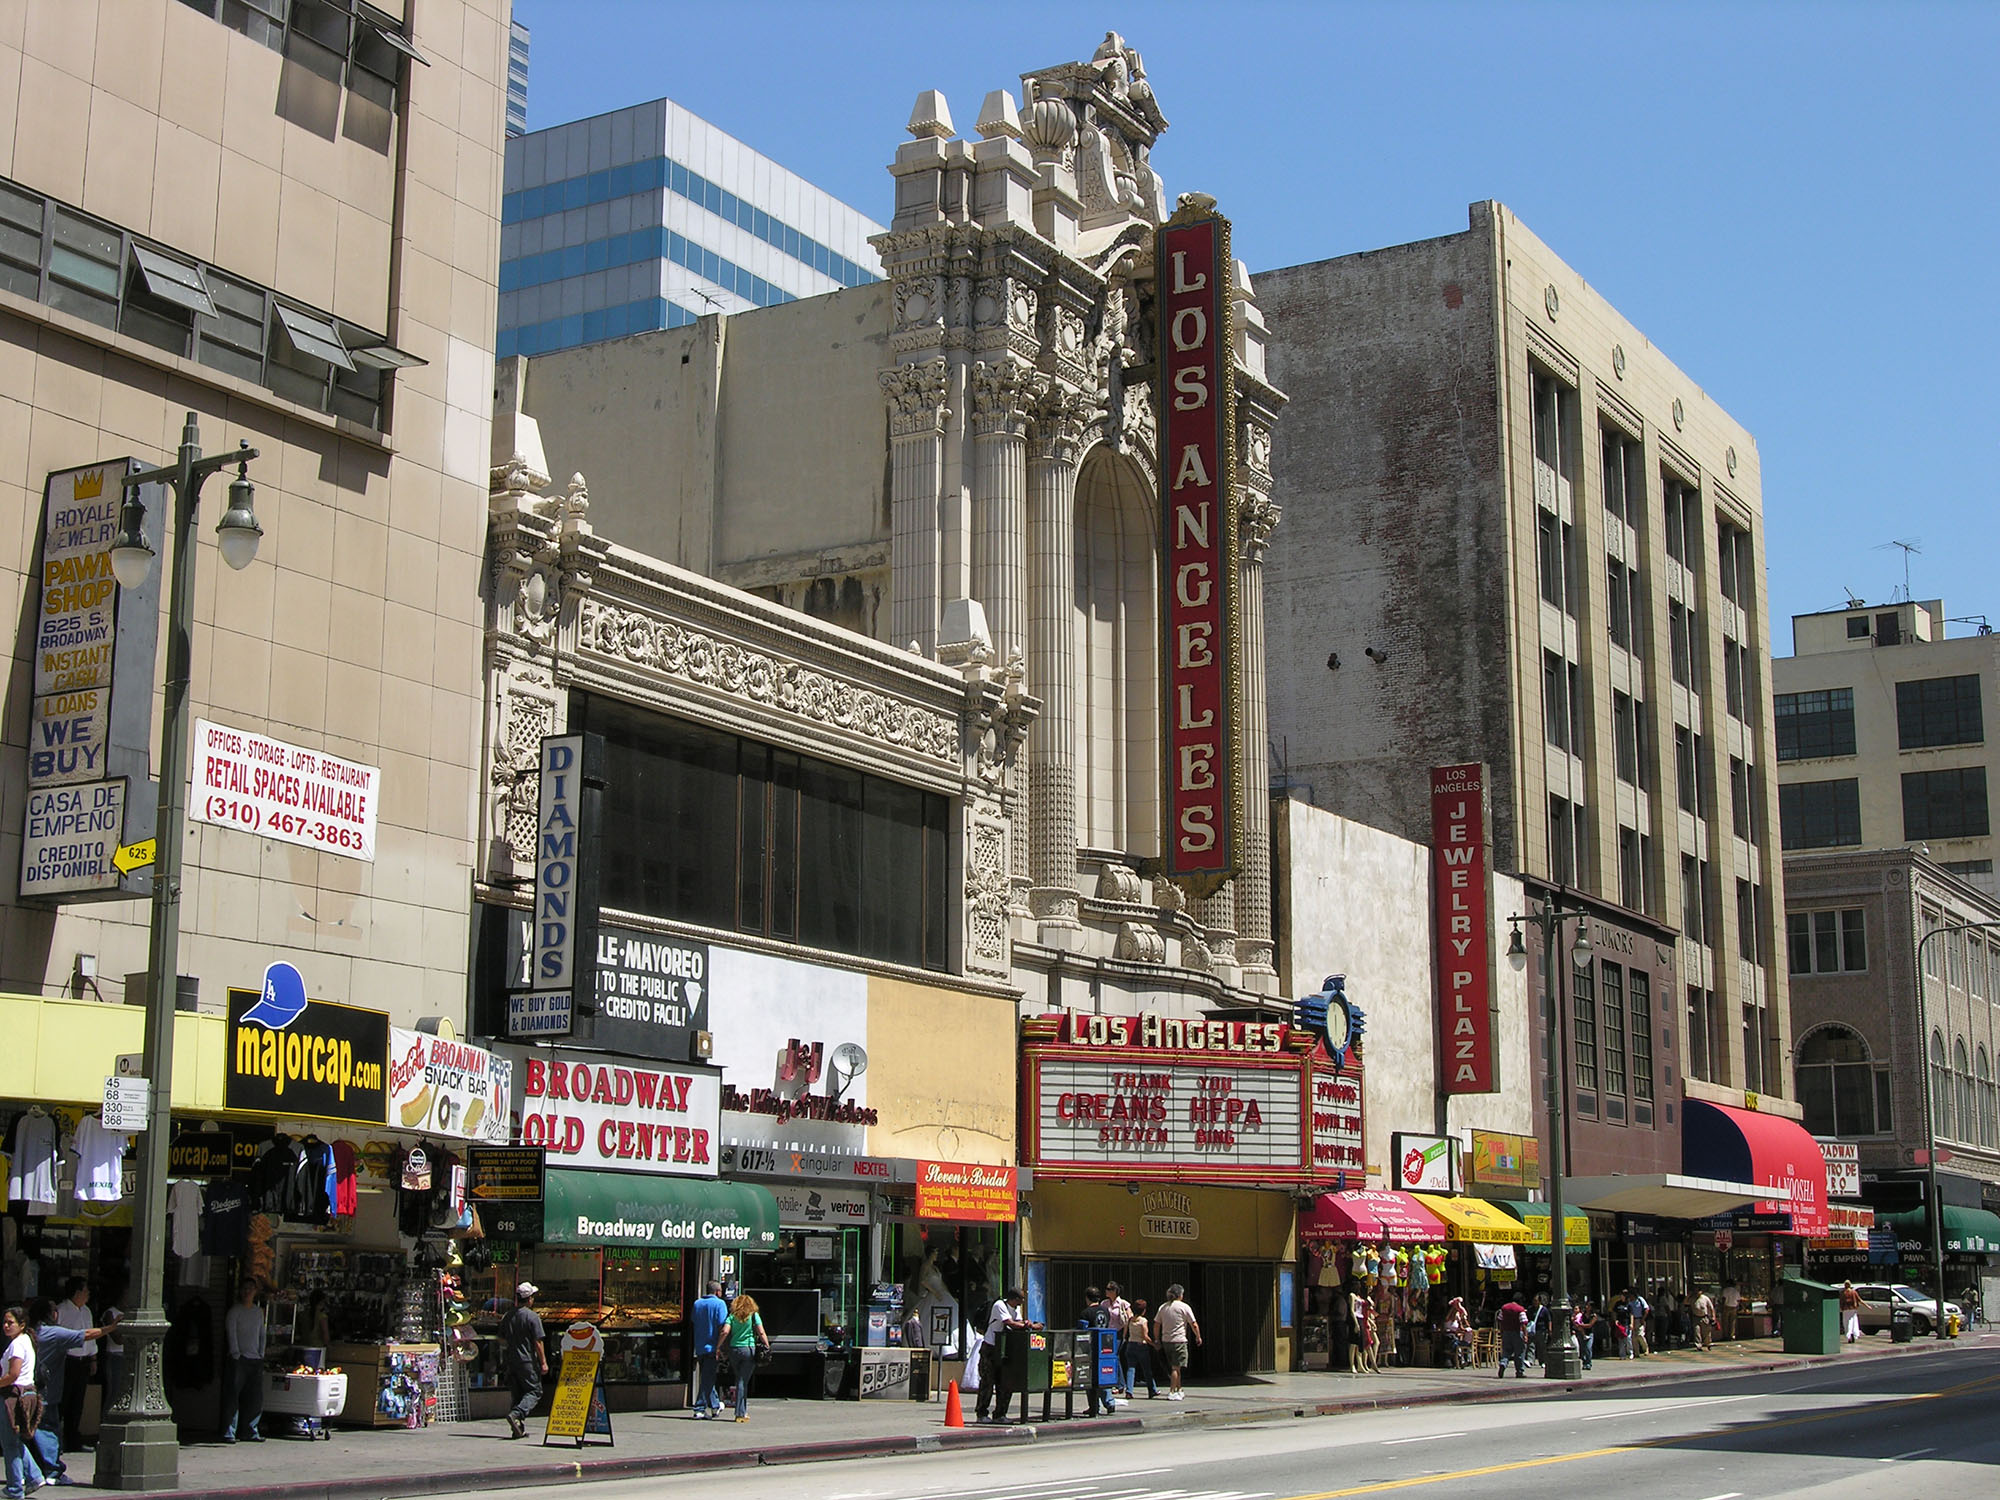 Downtown Los Angeles’s Broadway Street may soon go carfree